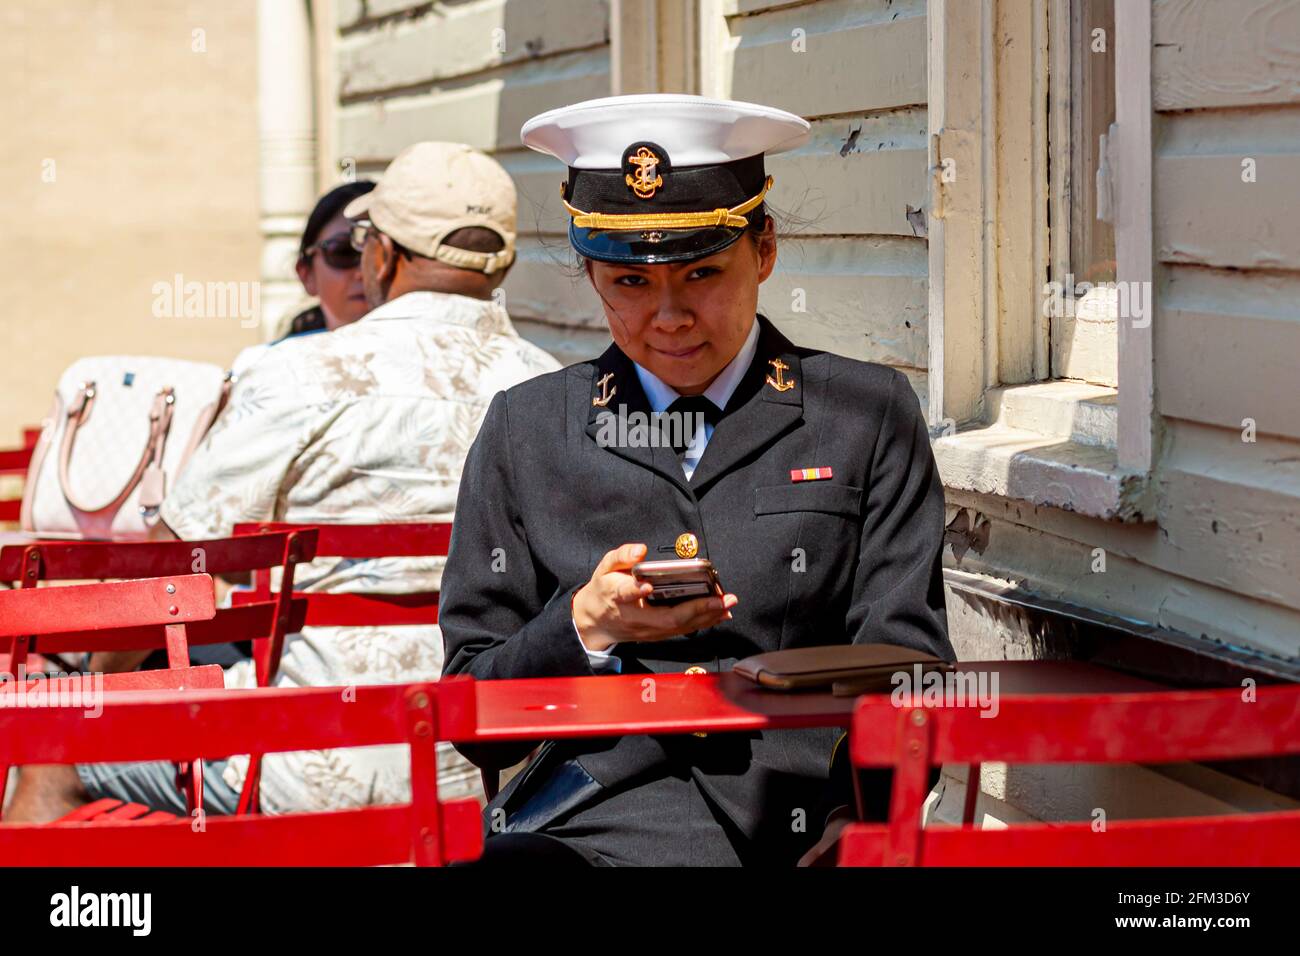 Annapolis, MD, USA 05-02-2021: A young Asian American female cadet training at the US Naval Academy in Annapolis is sitting at a restaurant table with Stock Photo